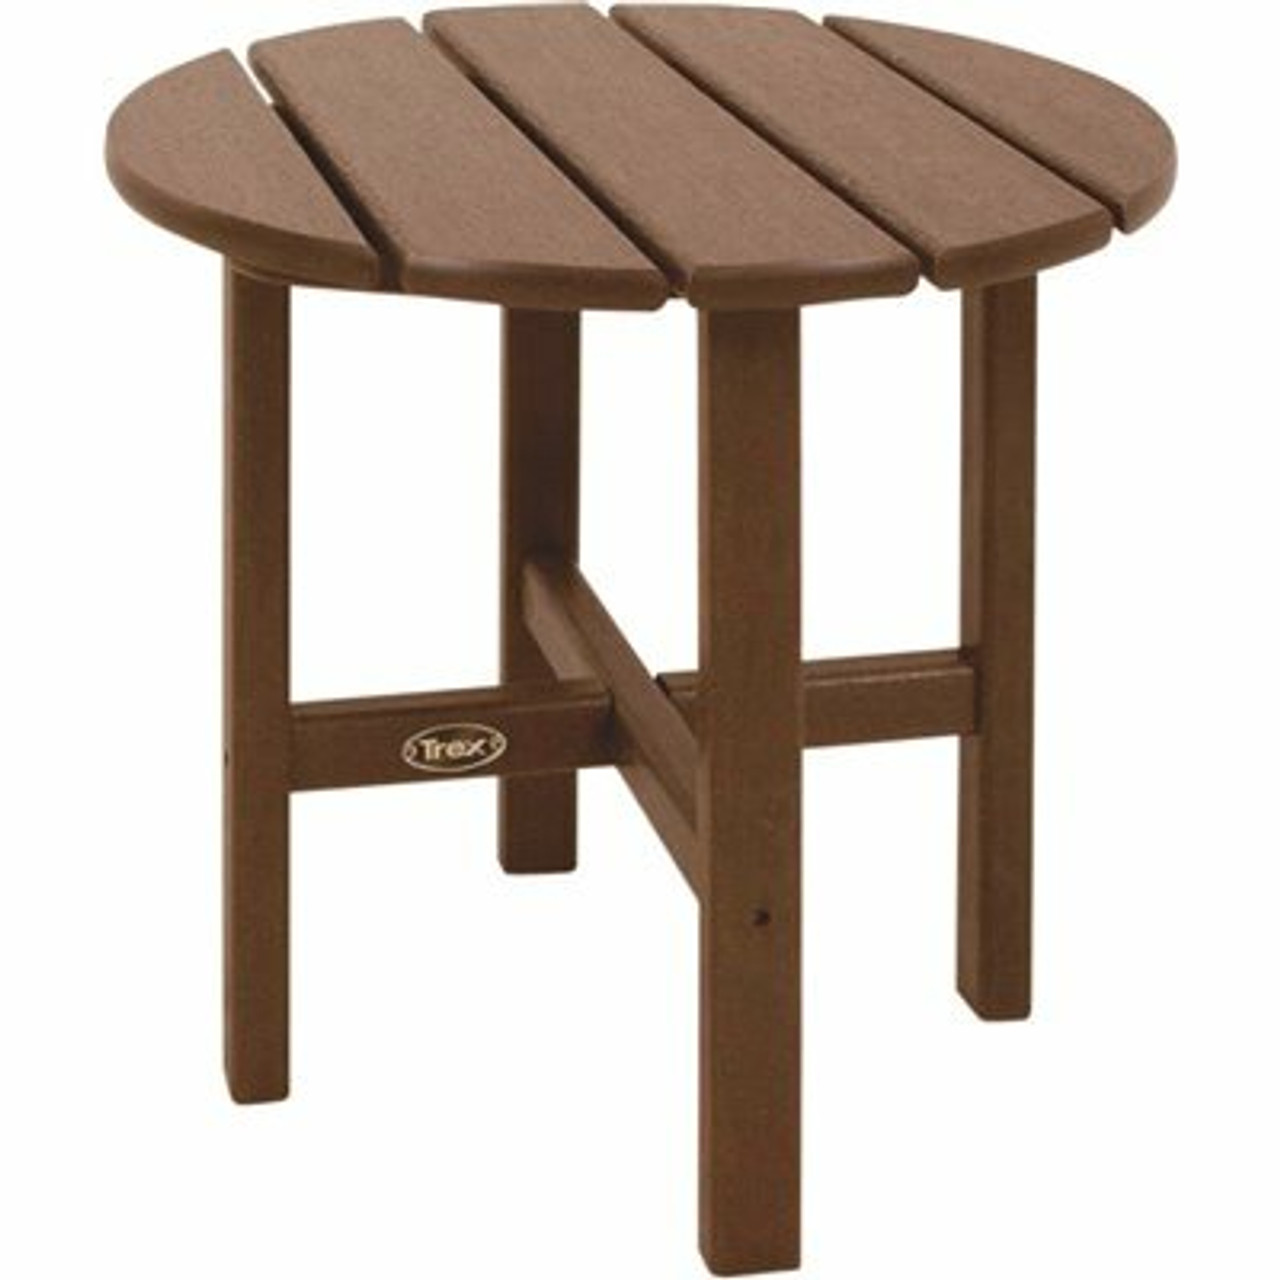 Trex Outdoor Furniture Cape Cod 18 In. Vintage Lantern Round Plastic Outdoor Patio Side Table